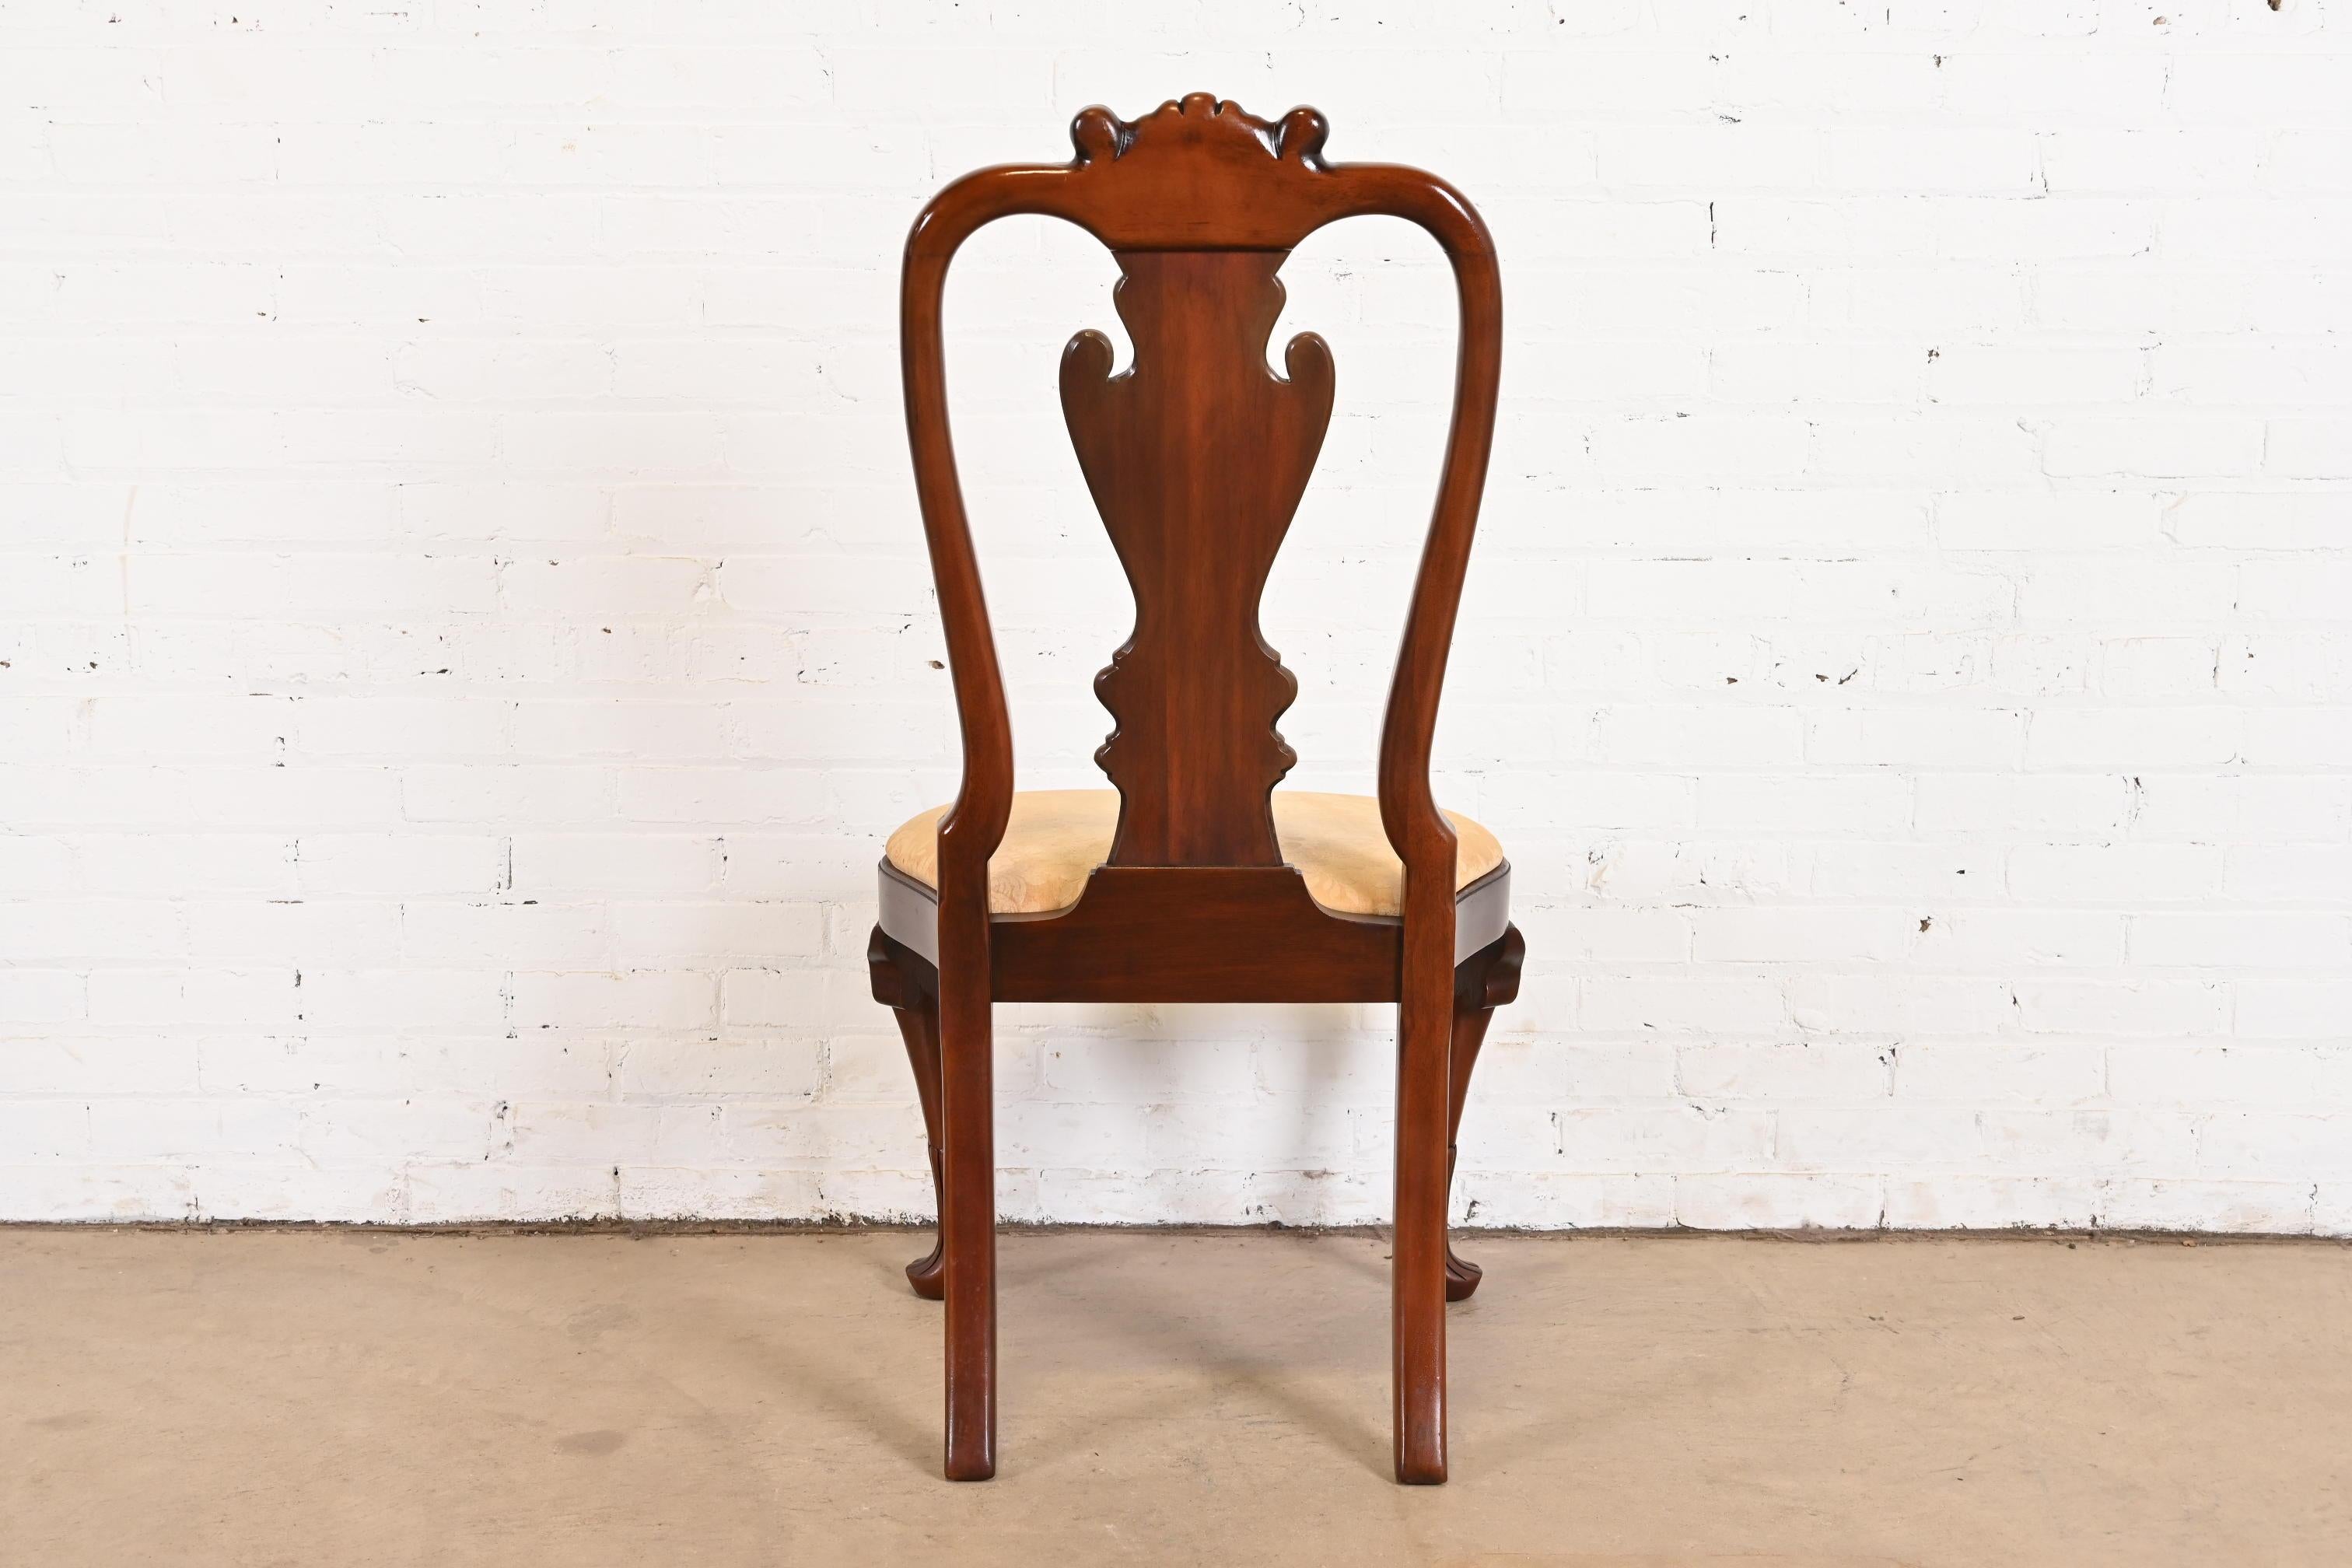 Kindel Furniture Winterthur Collection Georgian Carved Mahogany Dining Chairs For Sale 3